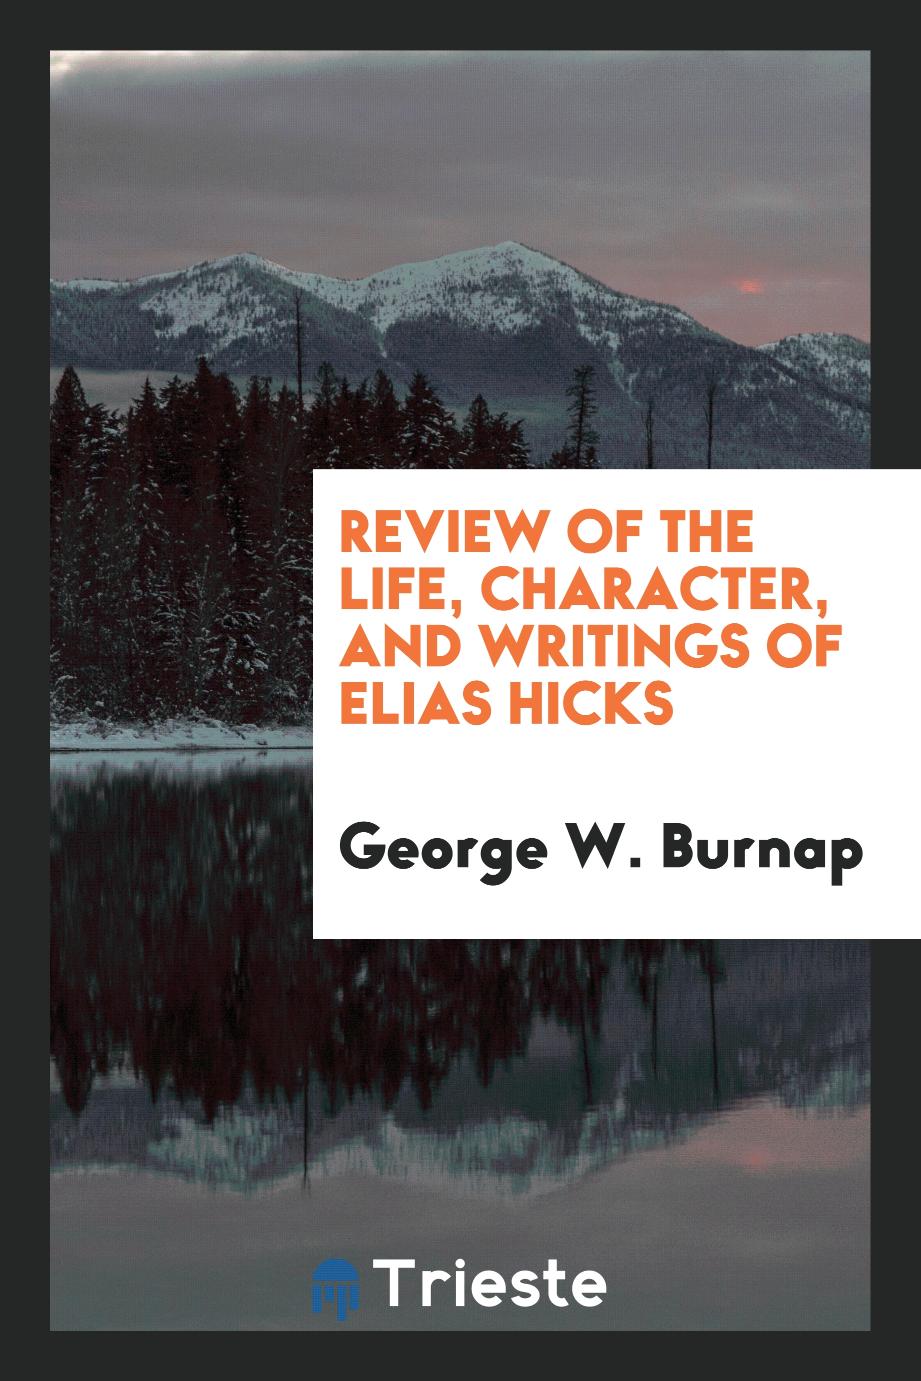 Review of the Life, Character, and Writings of Elias Hicks